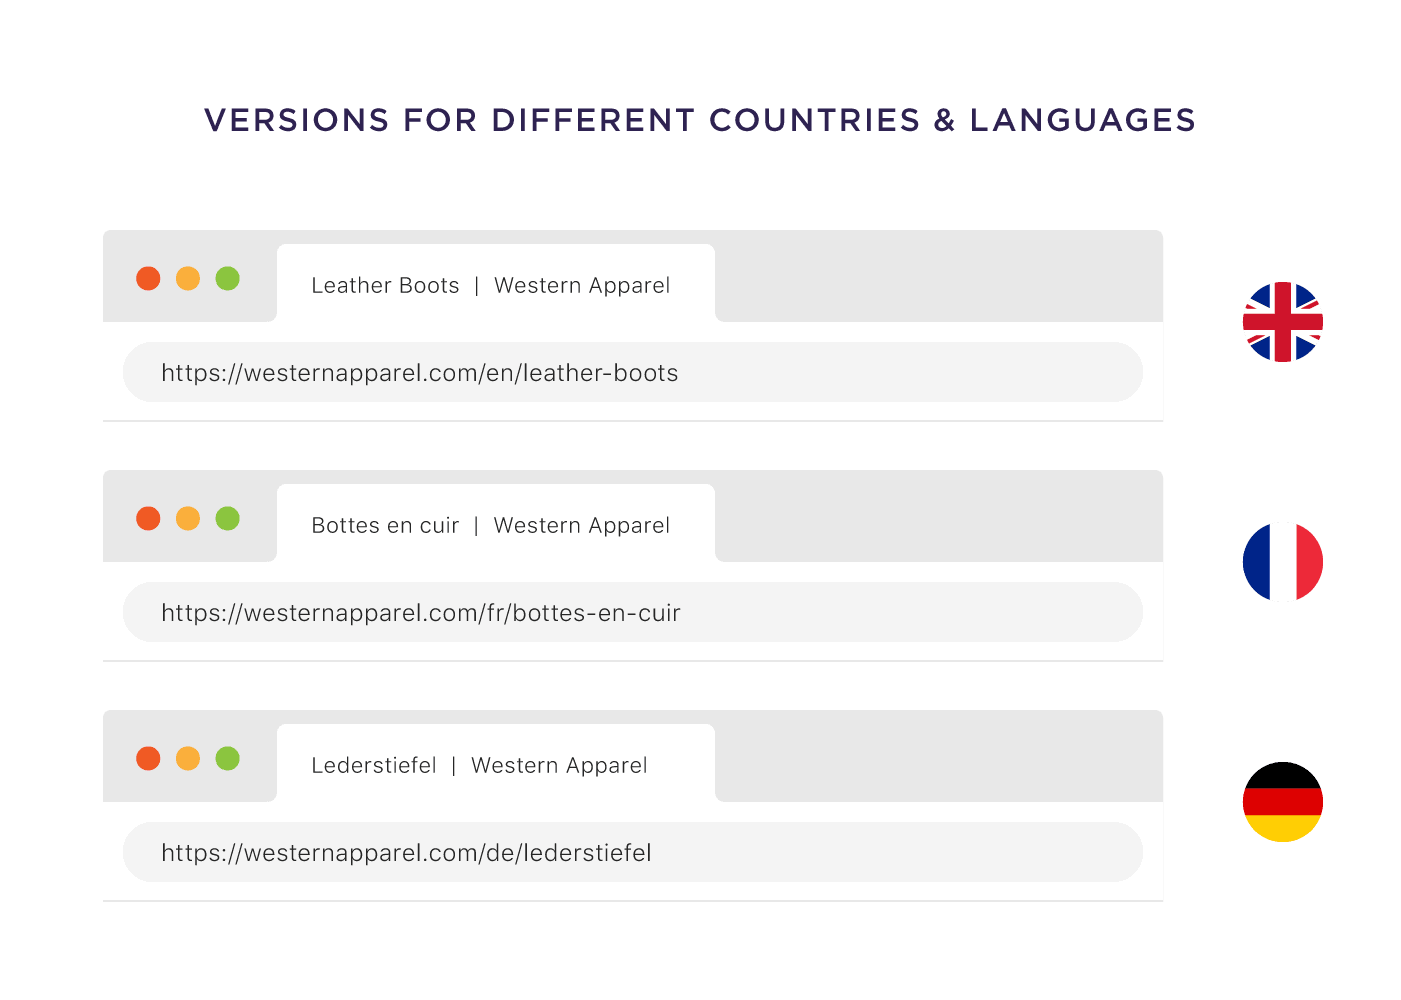 Versions for different countries and languages